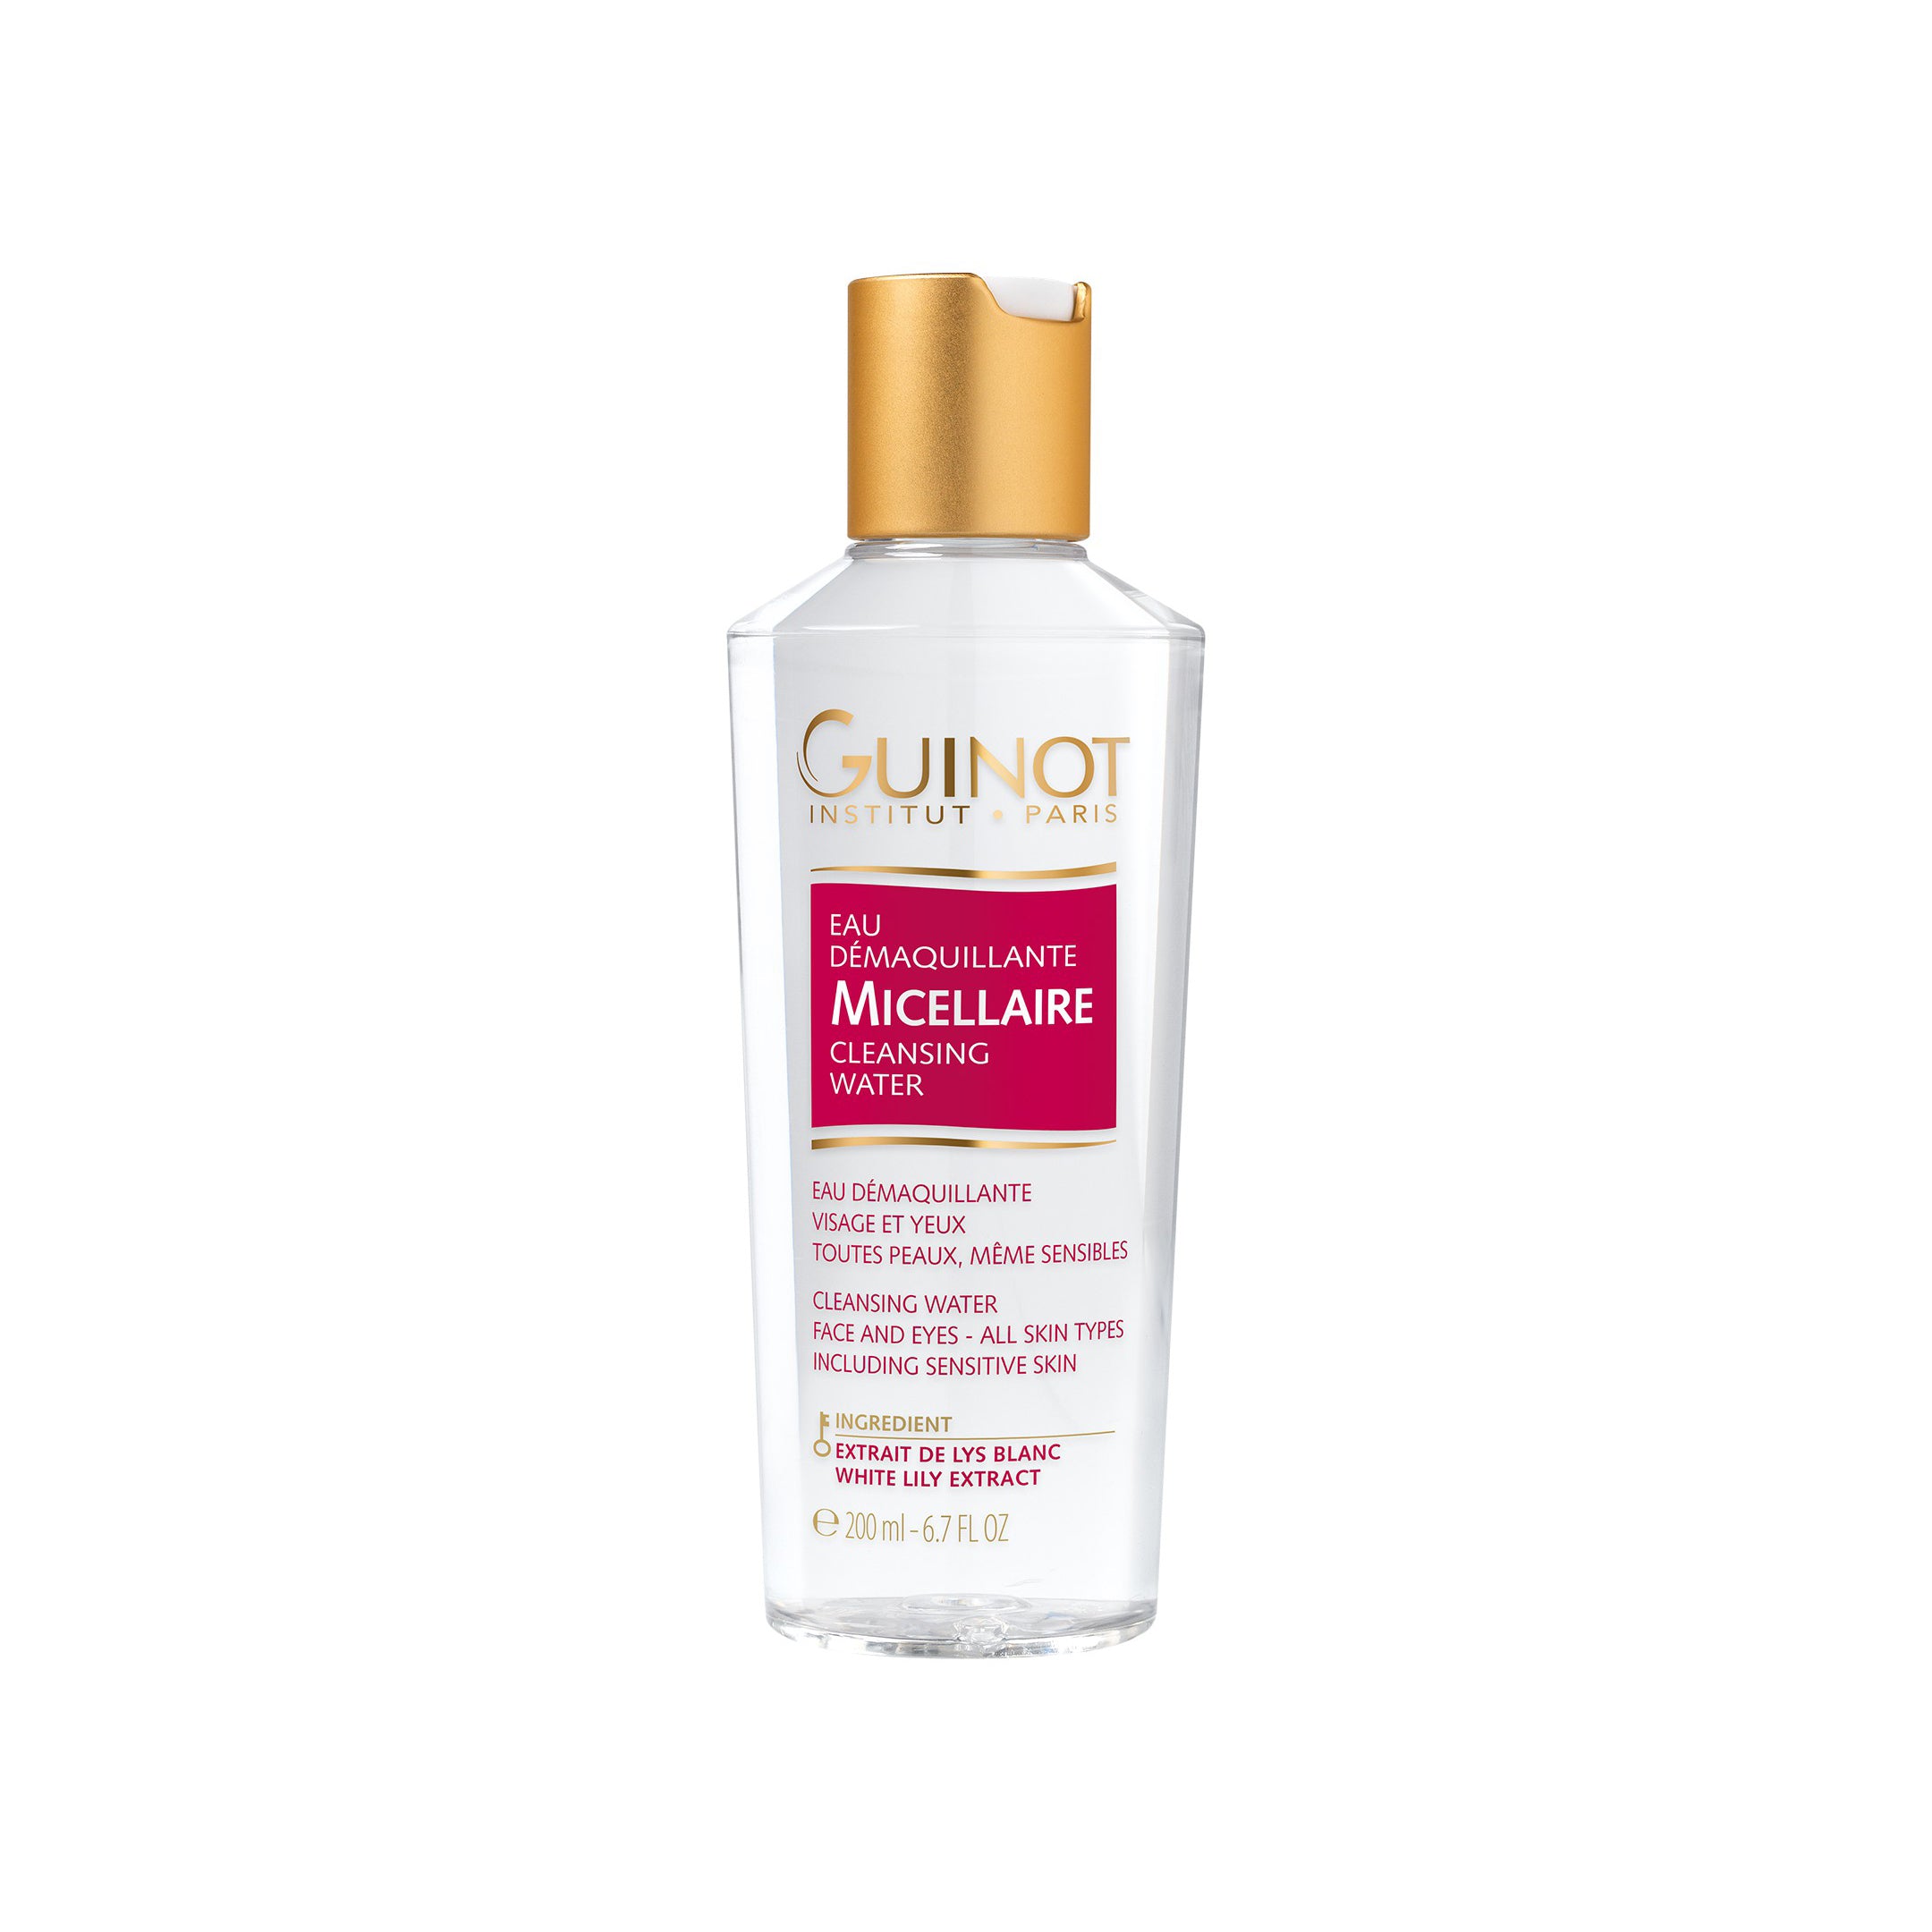 Instant Cleansing Water (Eau Demaquillante Micellaire) - Guinot